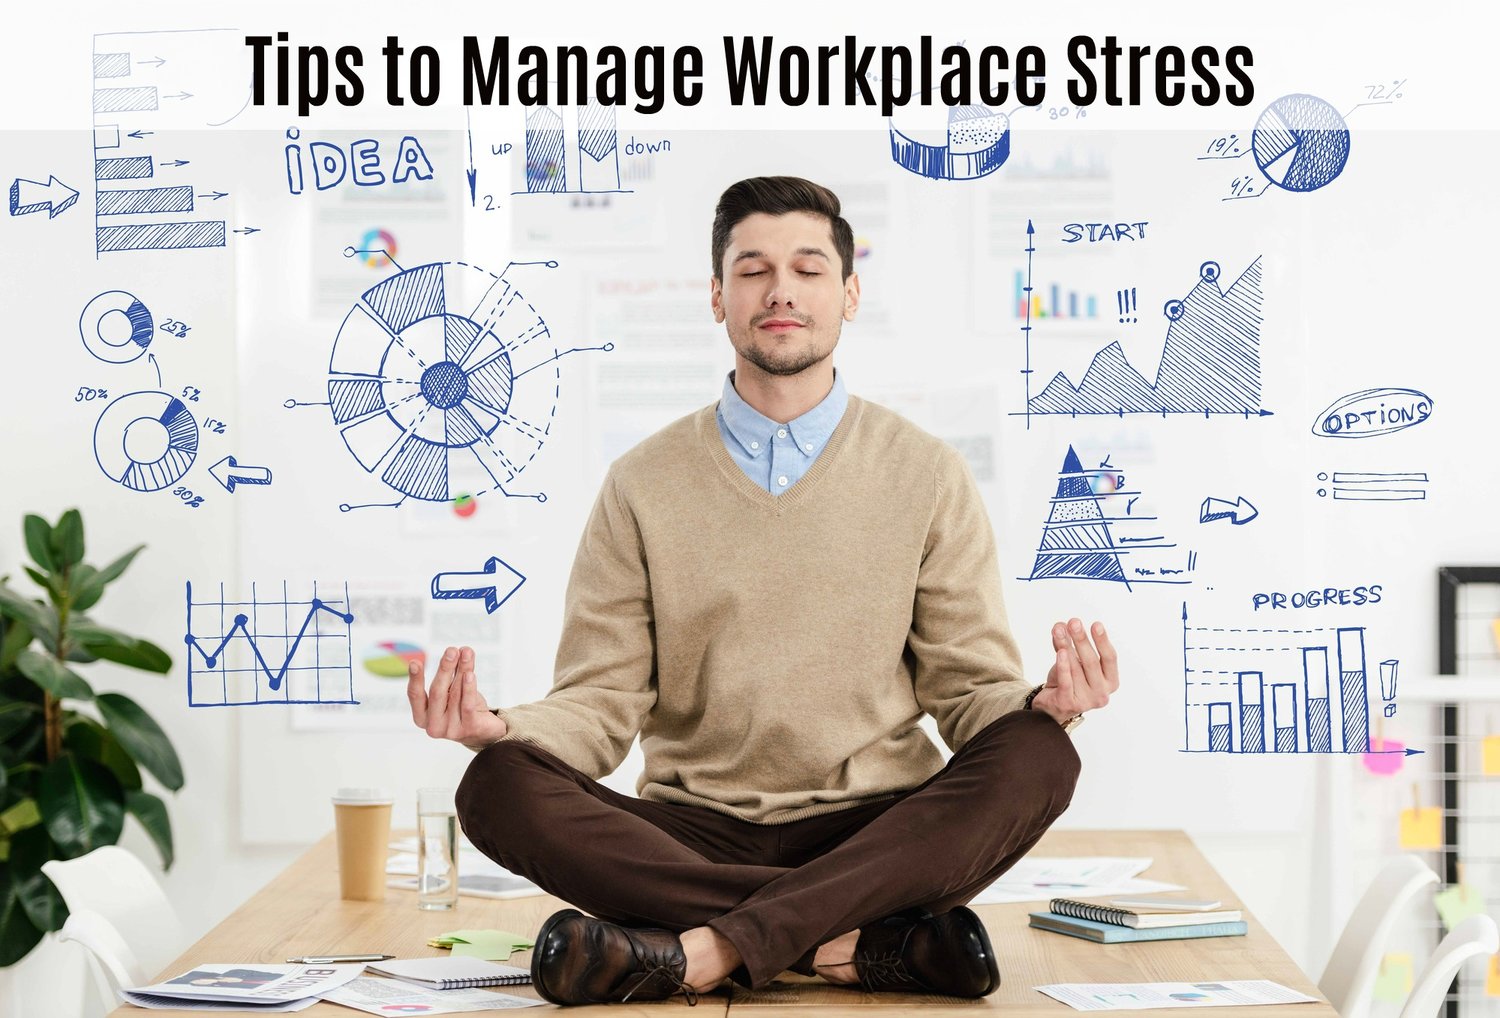 Five Ways to Prevent Work from Stressing You Out - Ergo Impact